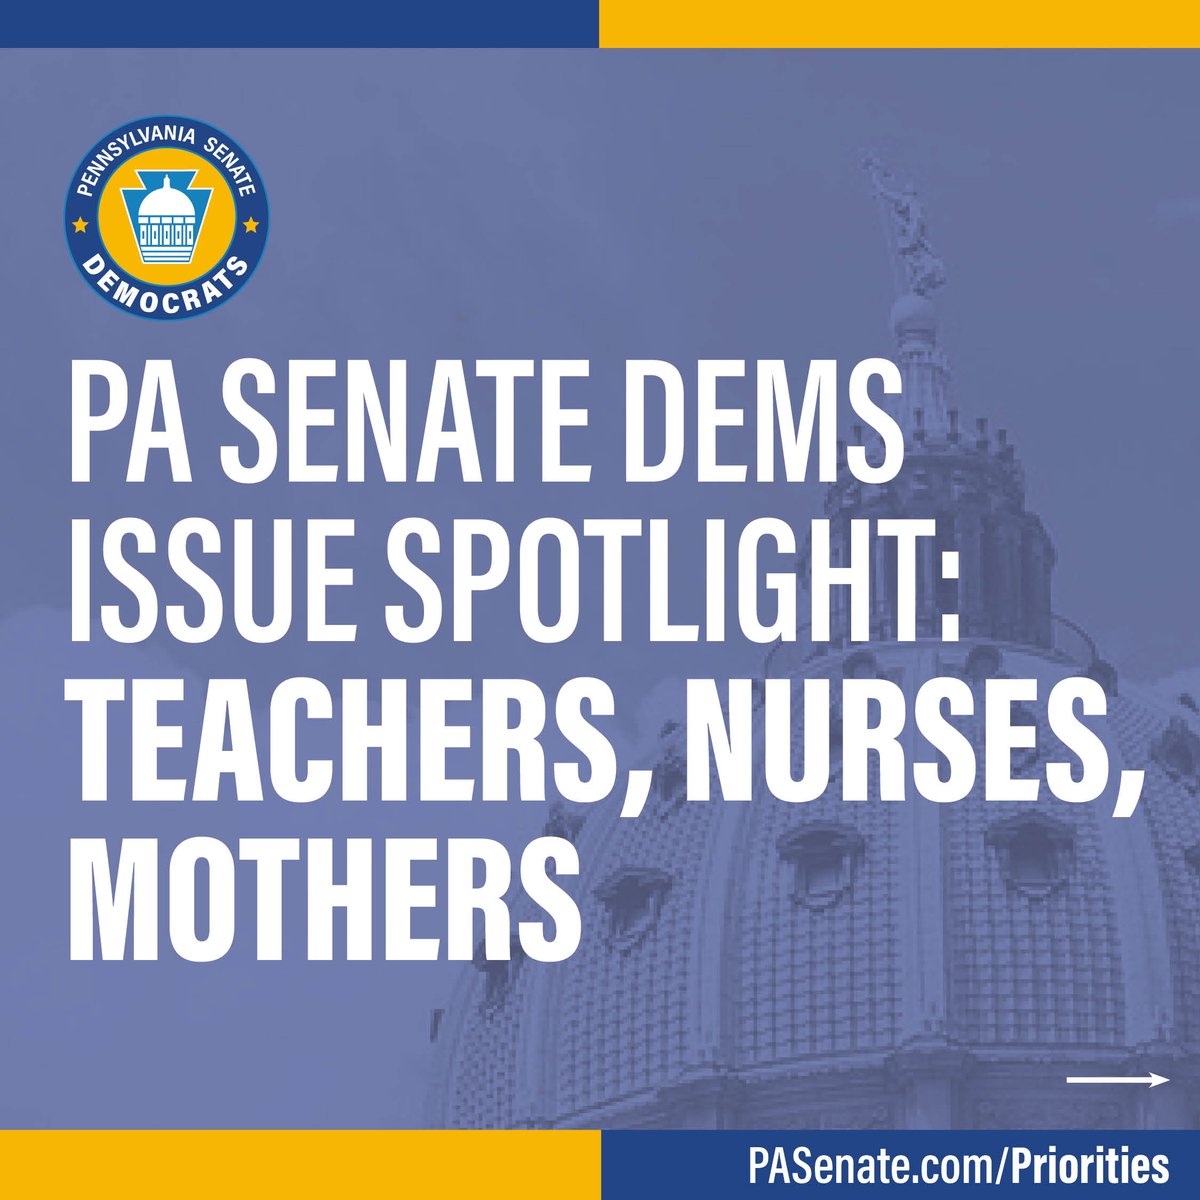 We want to support the incredible work being done by teachers, nurses & mothers throughout the Commonwealth. We have introduced legislation, held policy hearings and worked to support Pennsylvania's teachers, nurses and mothers. Learn more at PASenate.com/Priorities